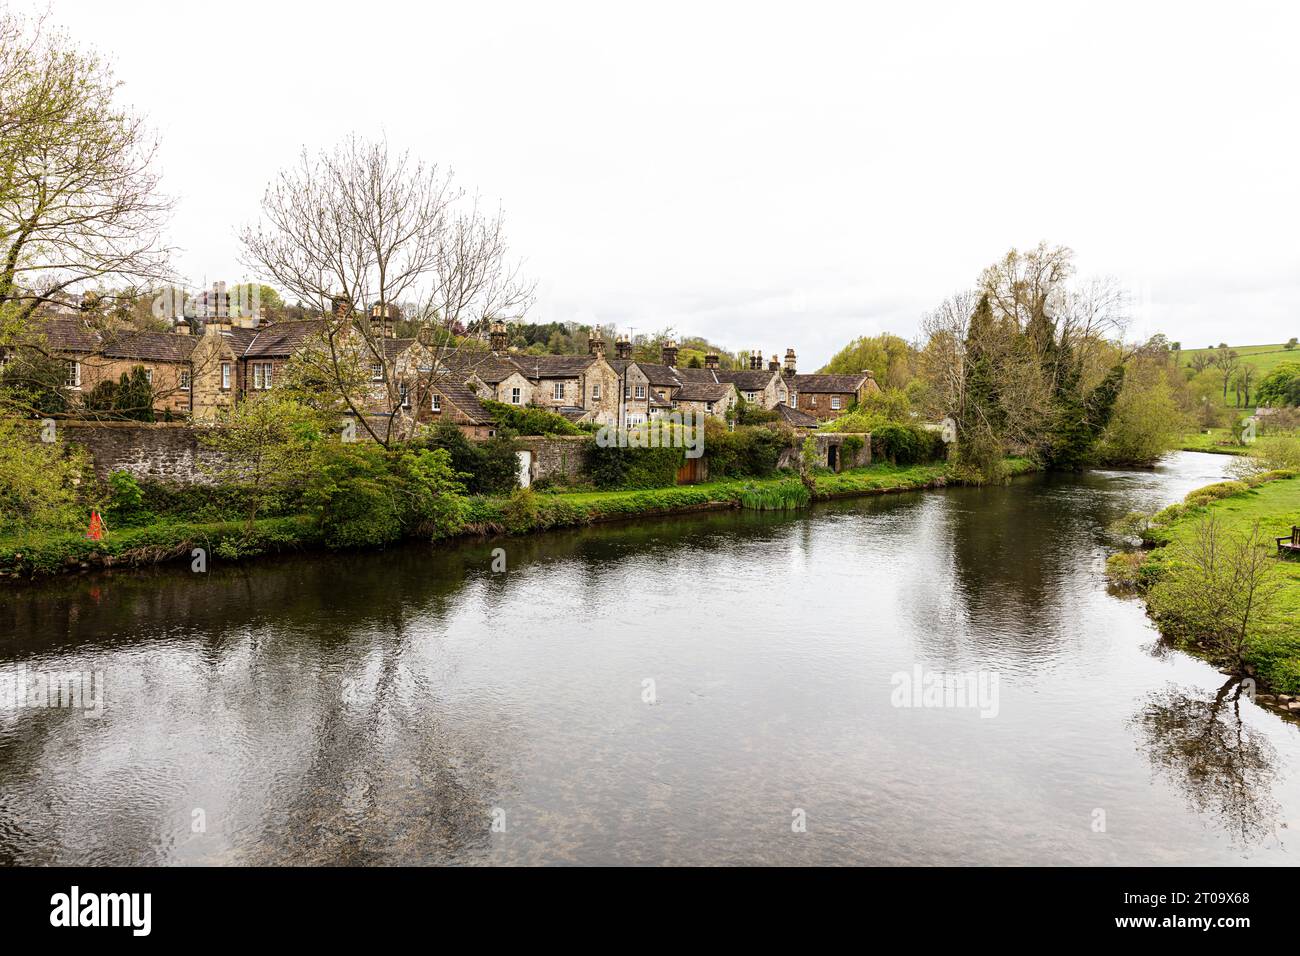 River wye, Bakewell, Derbyshire, UK, England, Bakewell town, Bakewell UK, Bakewell Derbyshire, Bakewell England, Town, market town, centre, houses, Stock Photo